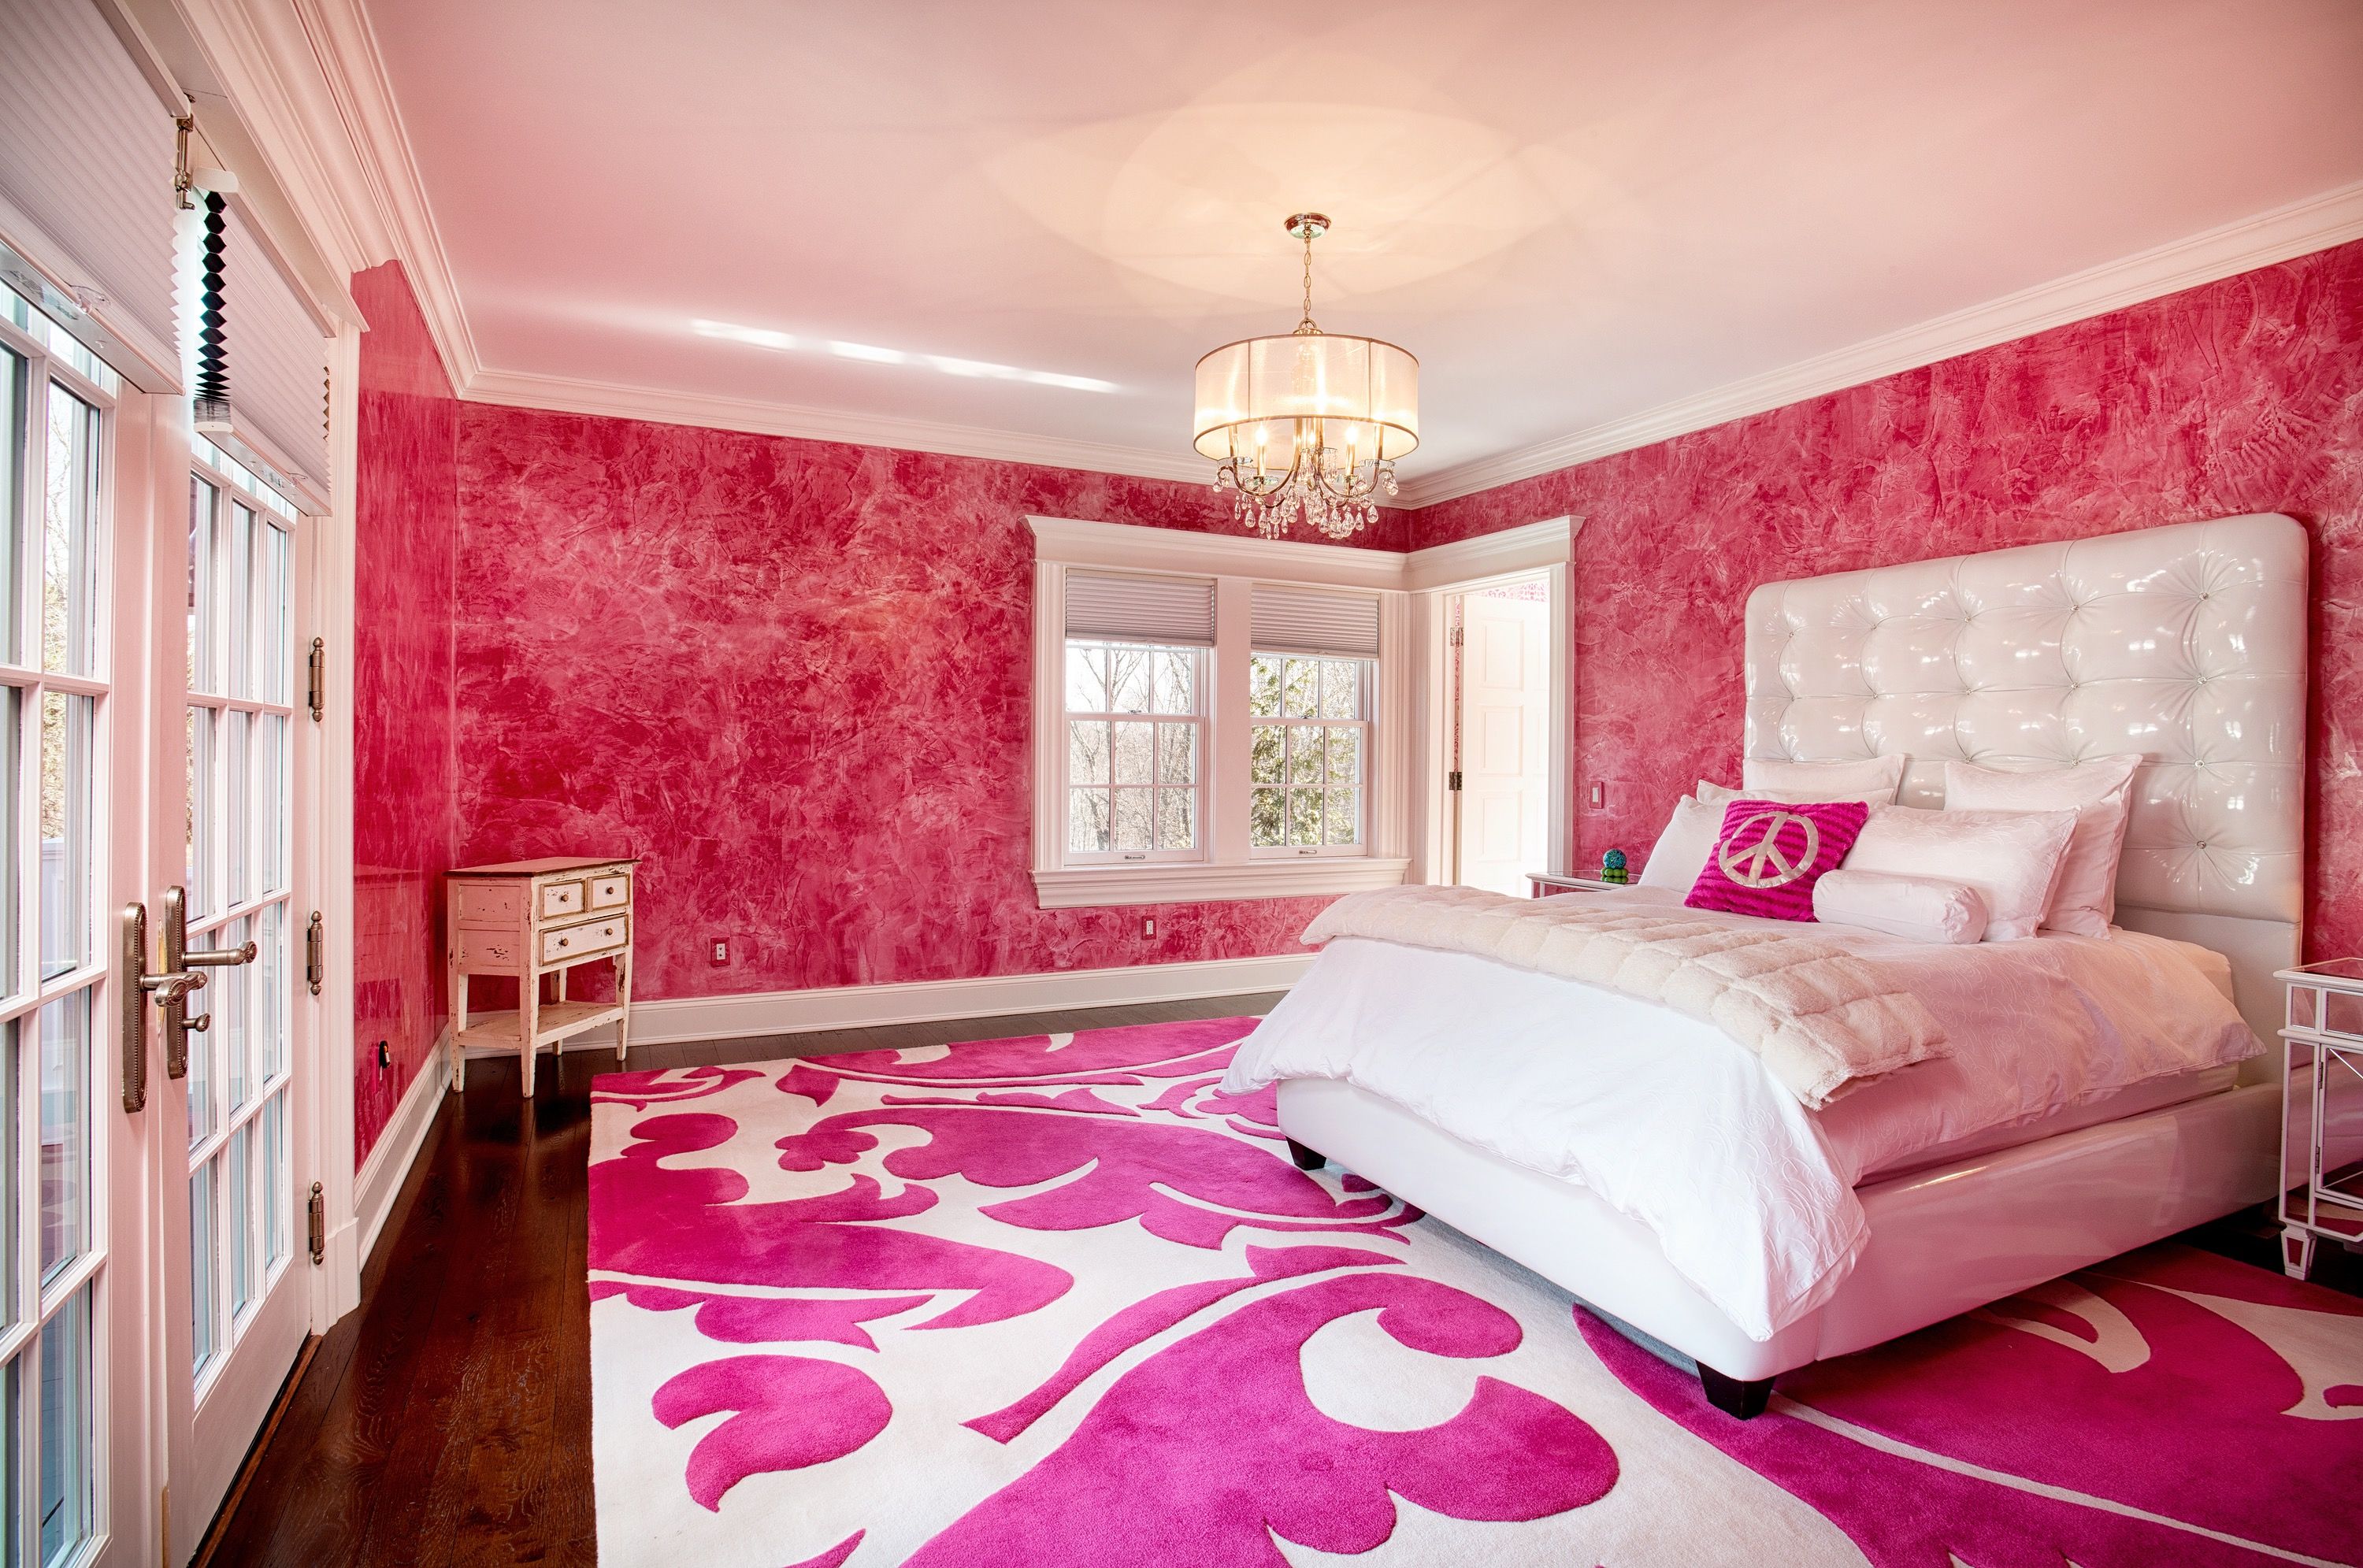 Pink And White Bedroom Color Theme With Elegant Touch (View 13 of 22)